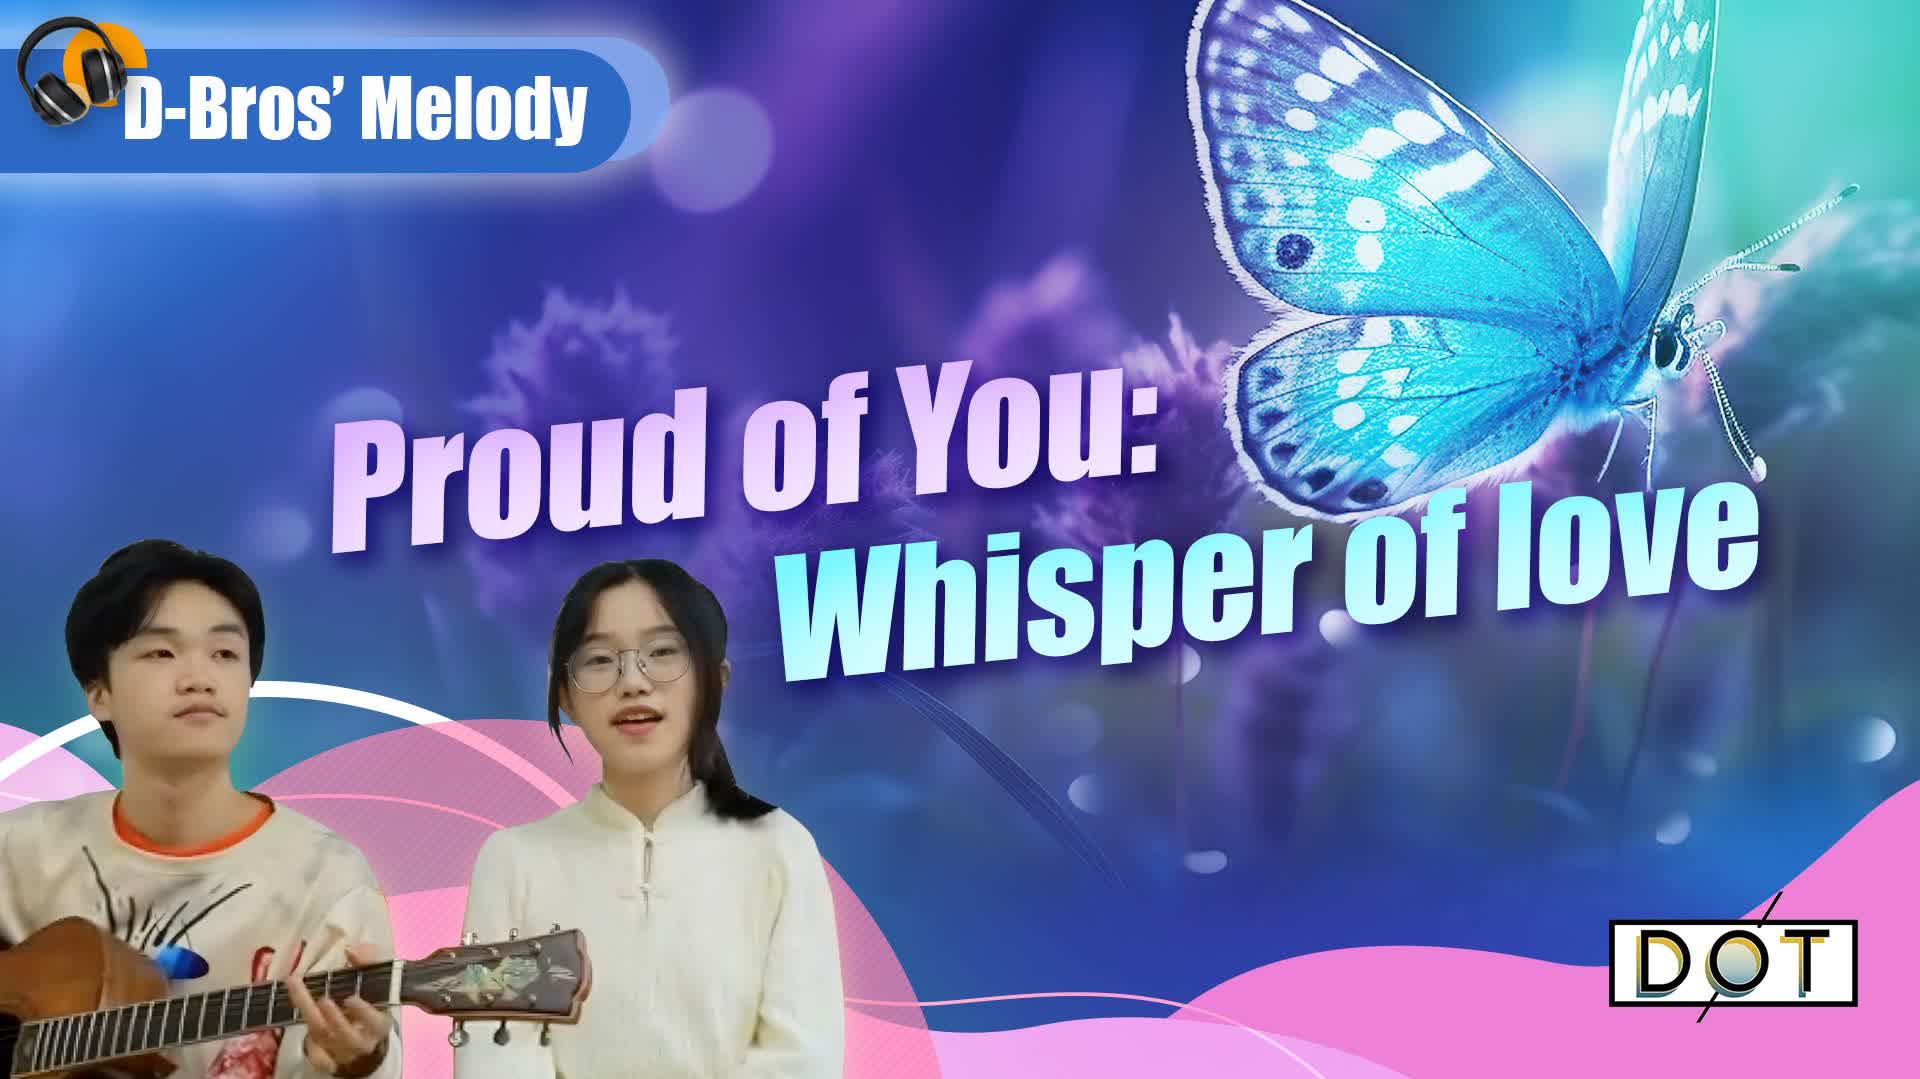 D-Bros' Melodies | Proud of You: Whisper of love